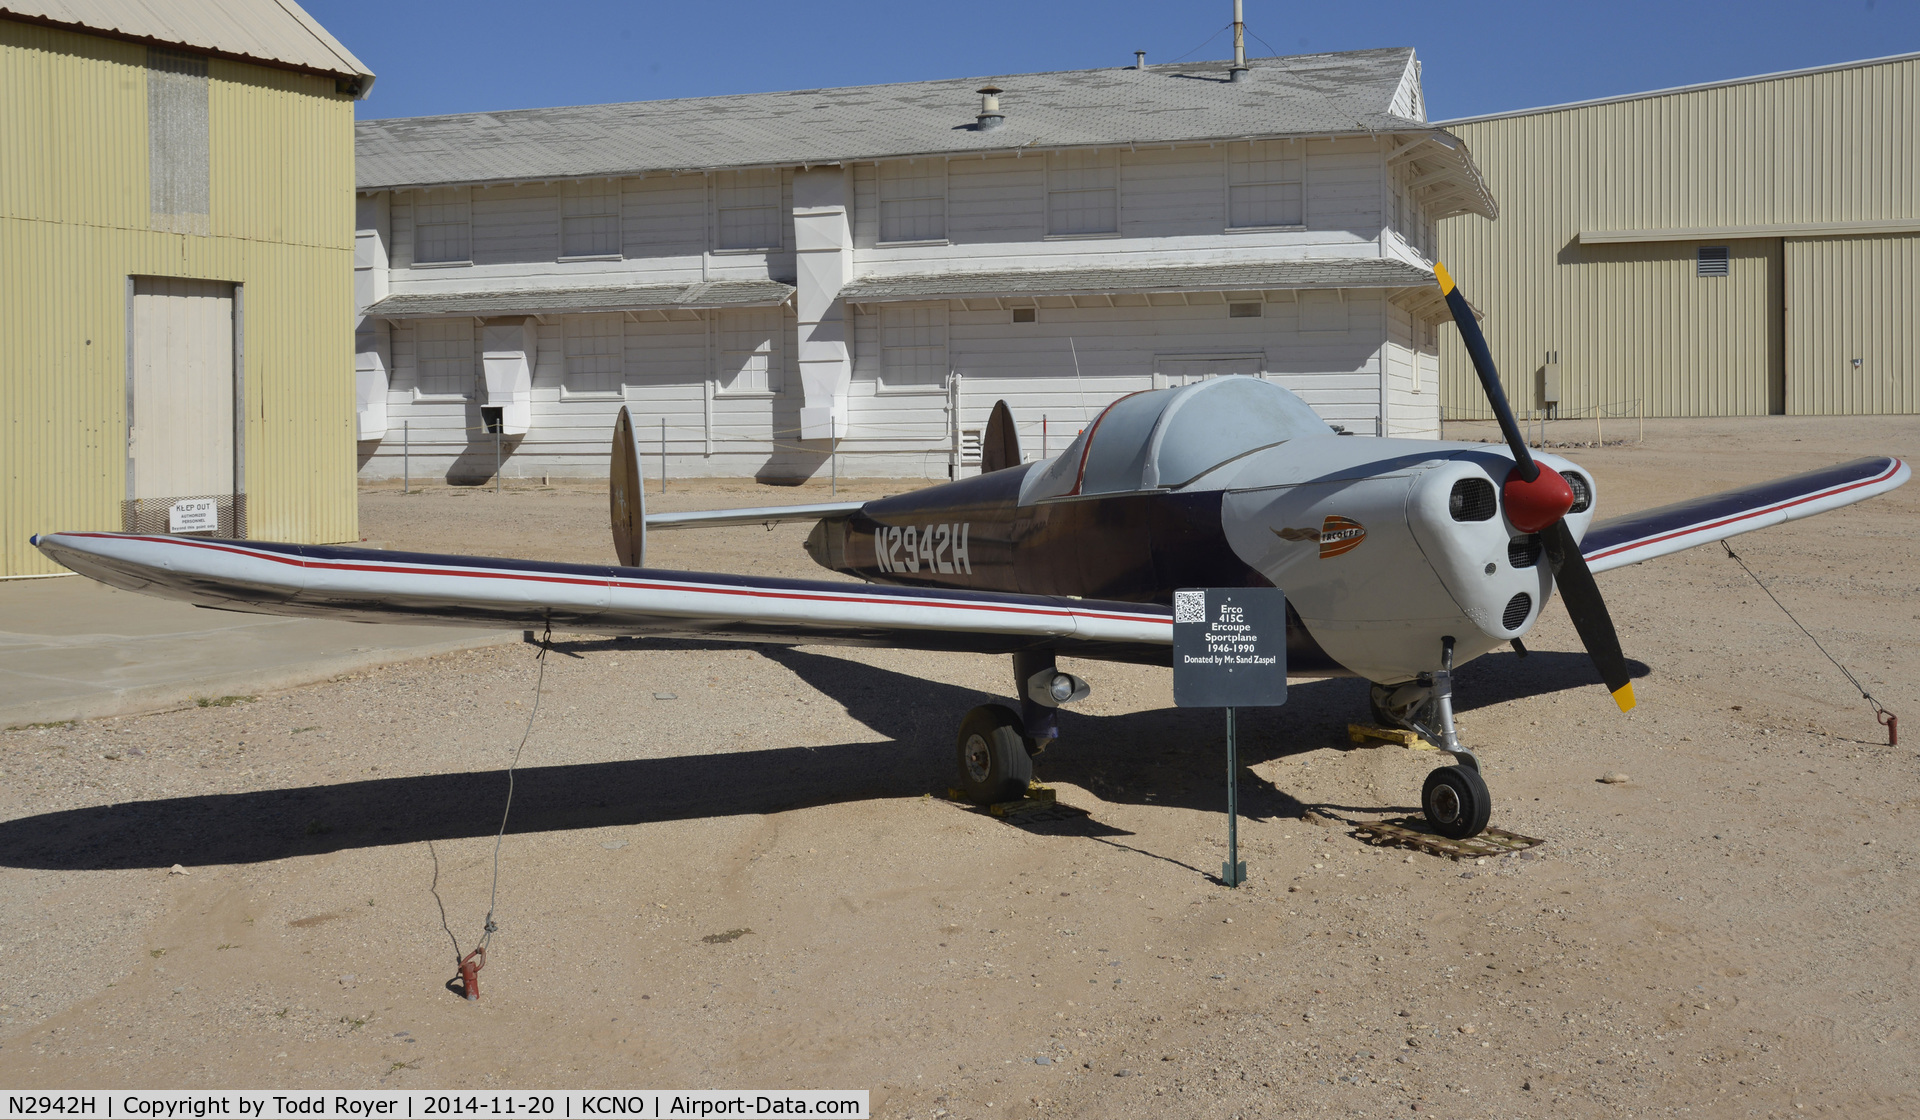 N2942H, 1946 Erco 415C Ercoupe C/N 3567, On display at the Pima Air and Space Museum